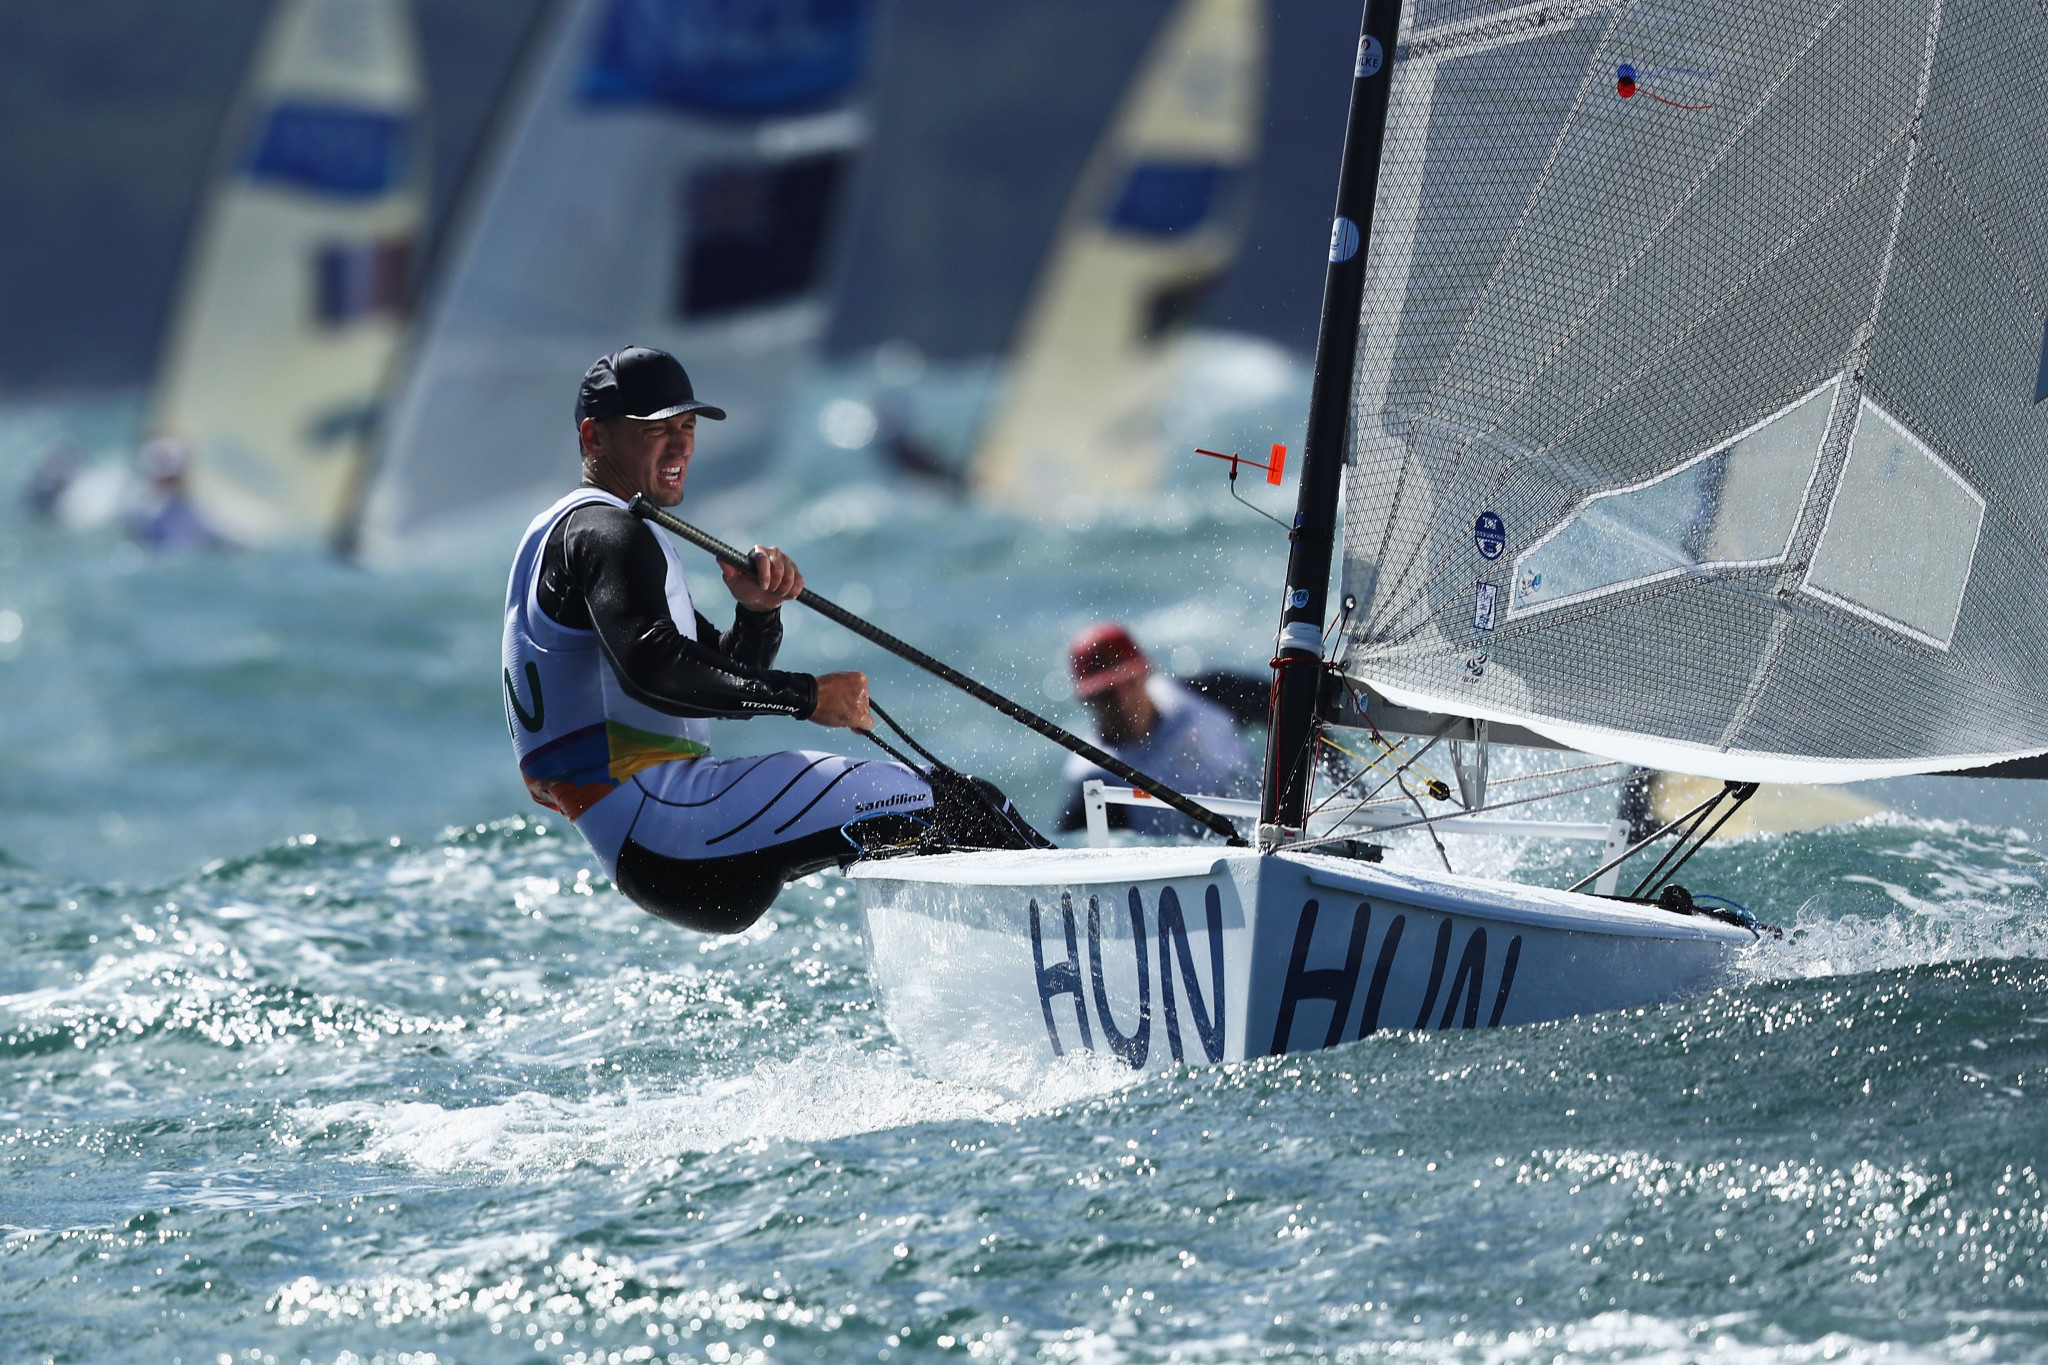 Berecz takes pole position with one day left at Finn European Championships